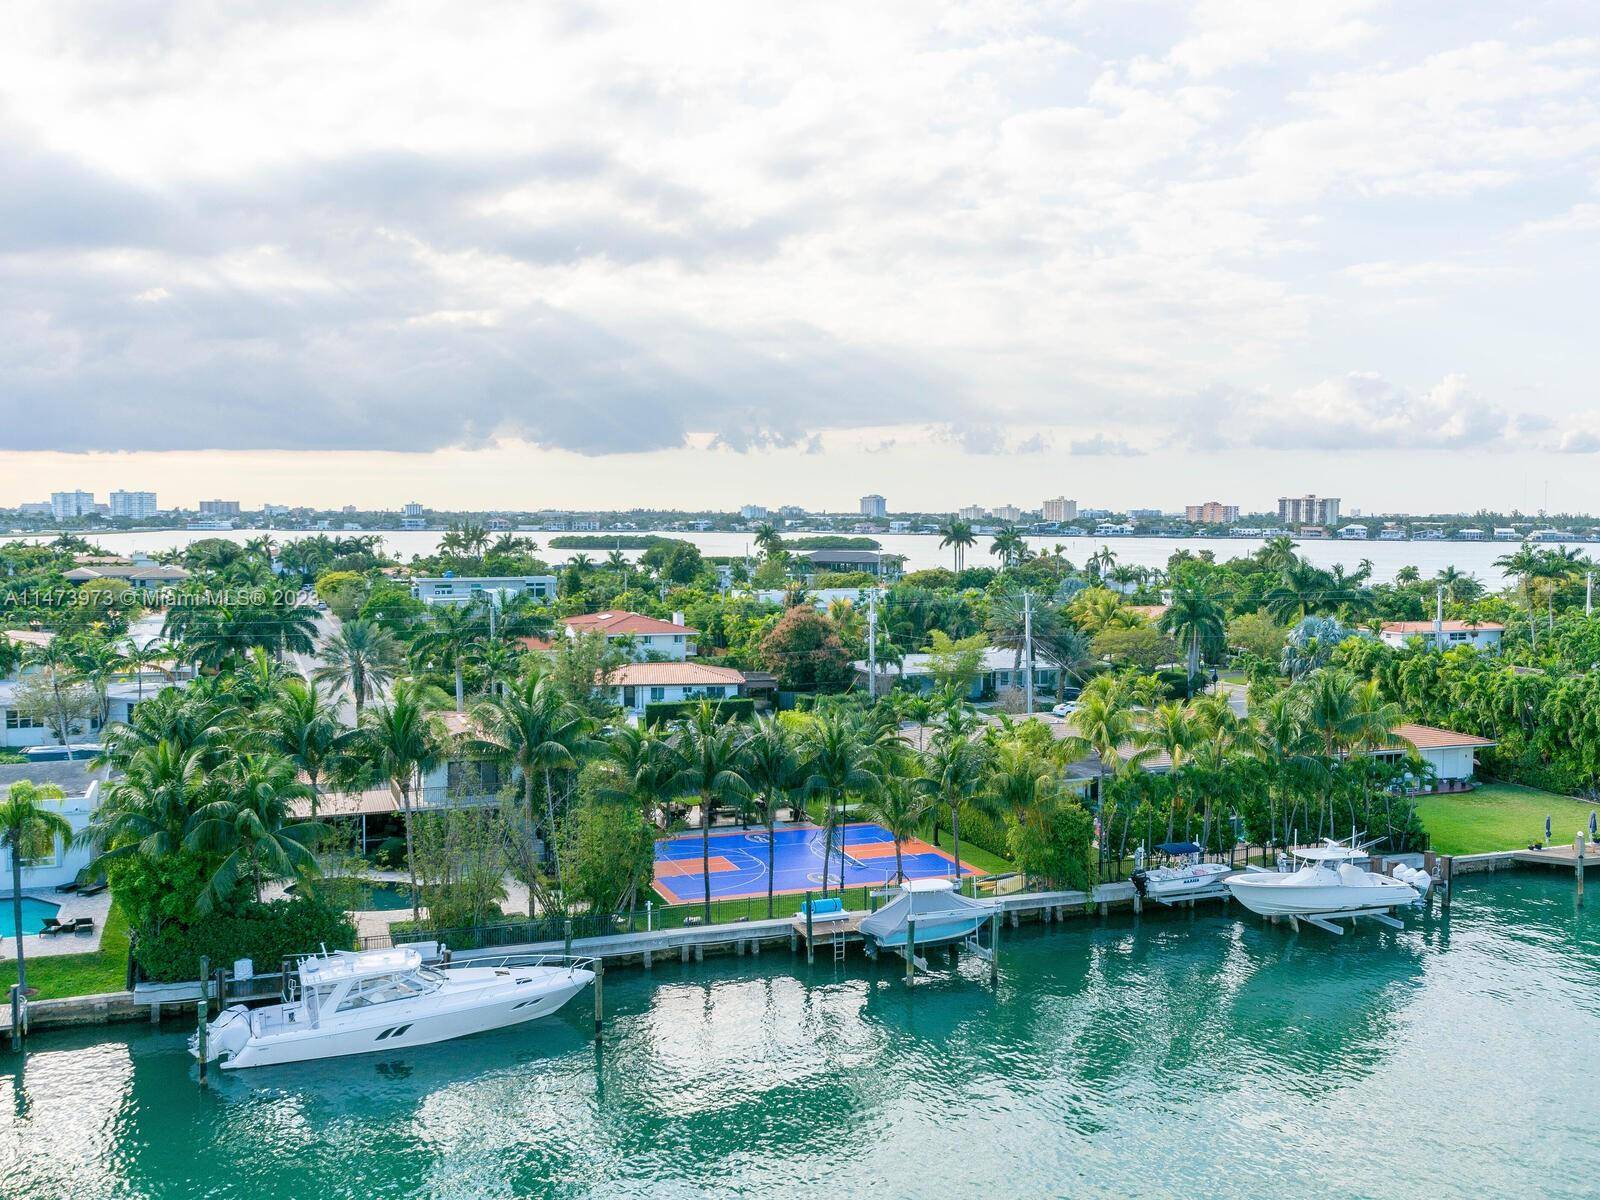 Live in beautiful Bay Harbor Islands in this spacious 2 bdrm 2.